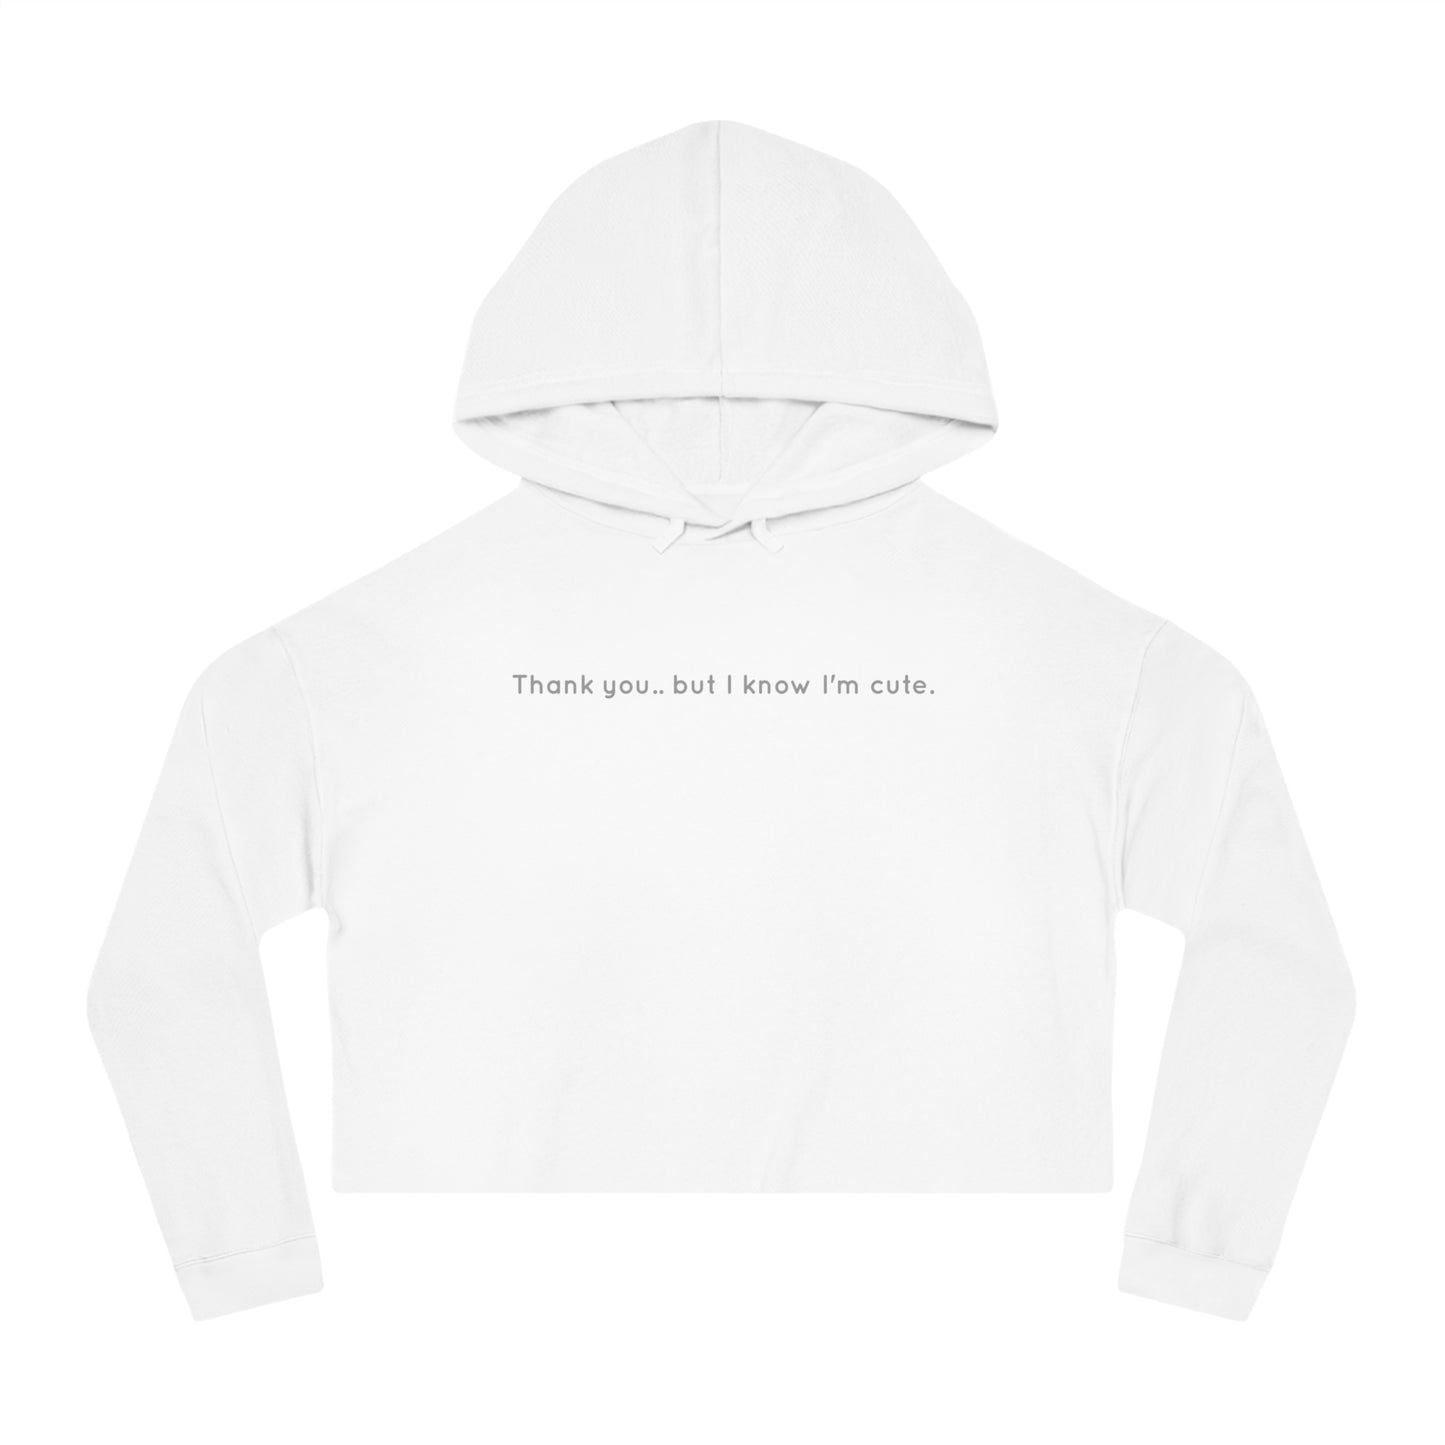 "Thank you.. but I know I'm cute". - Women’s Cropped Hooded Sweatshirt